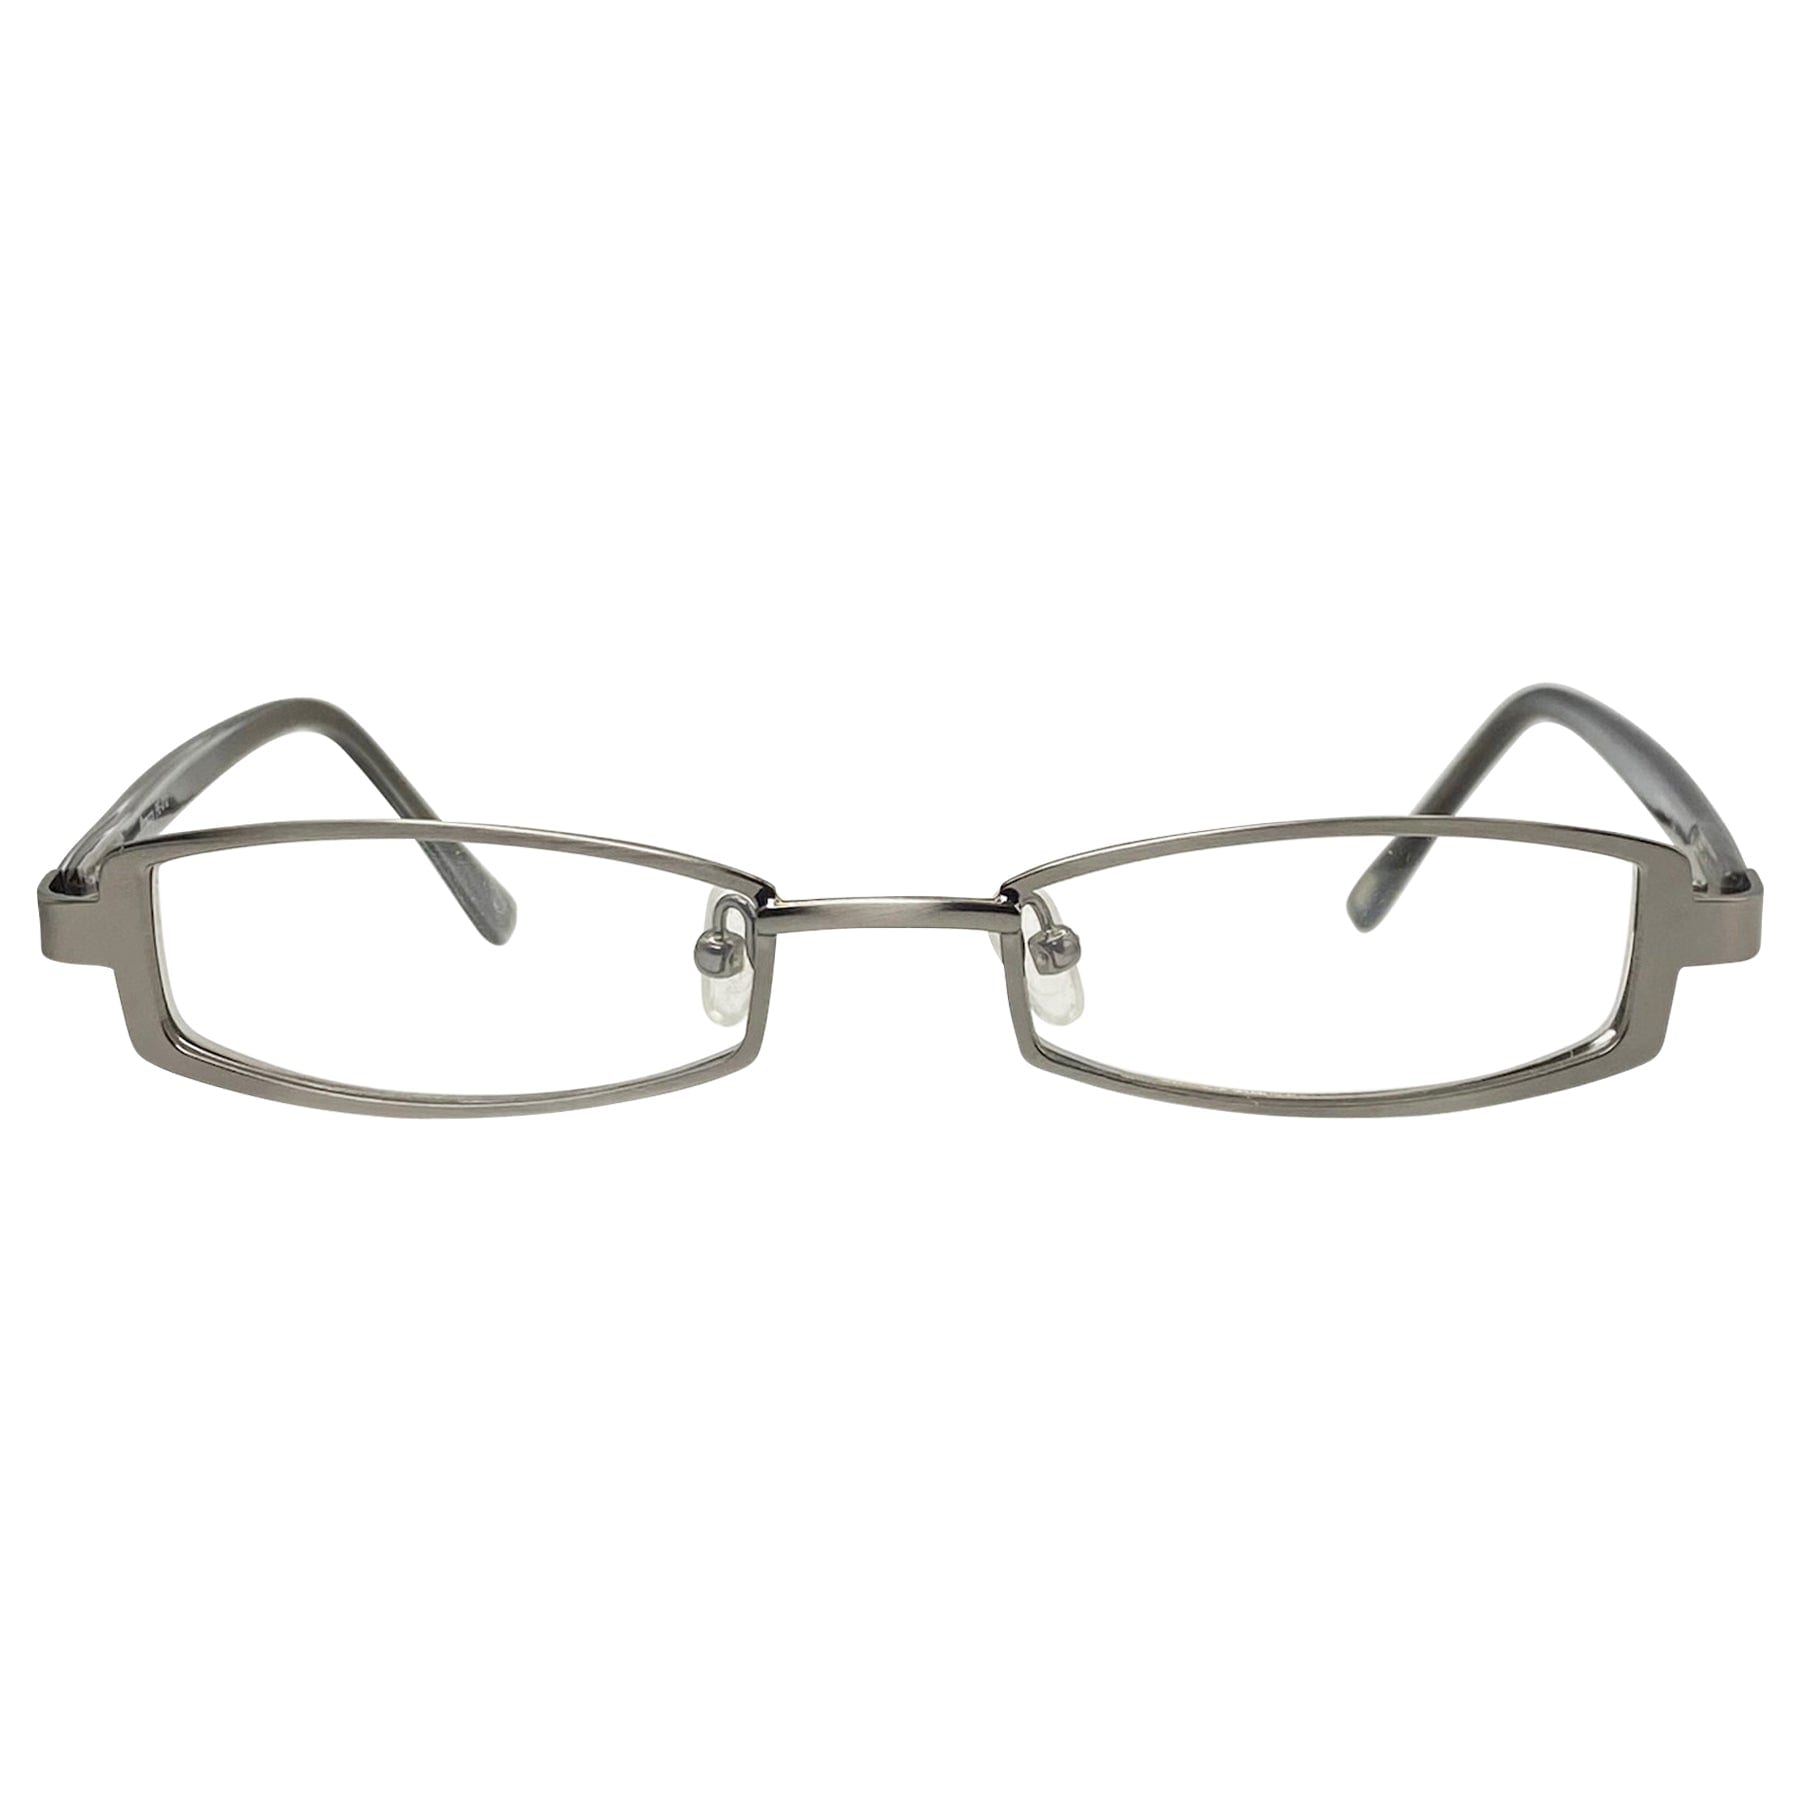 rectangular cat-eye glasses with a 90s style frame